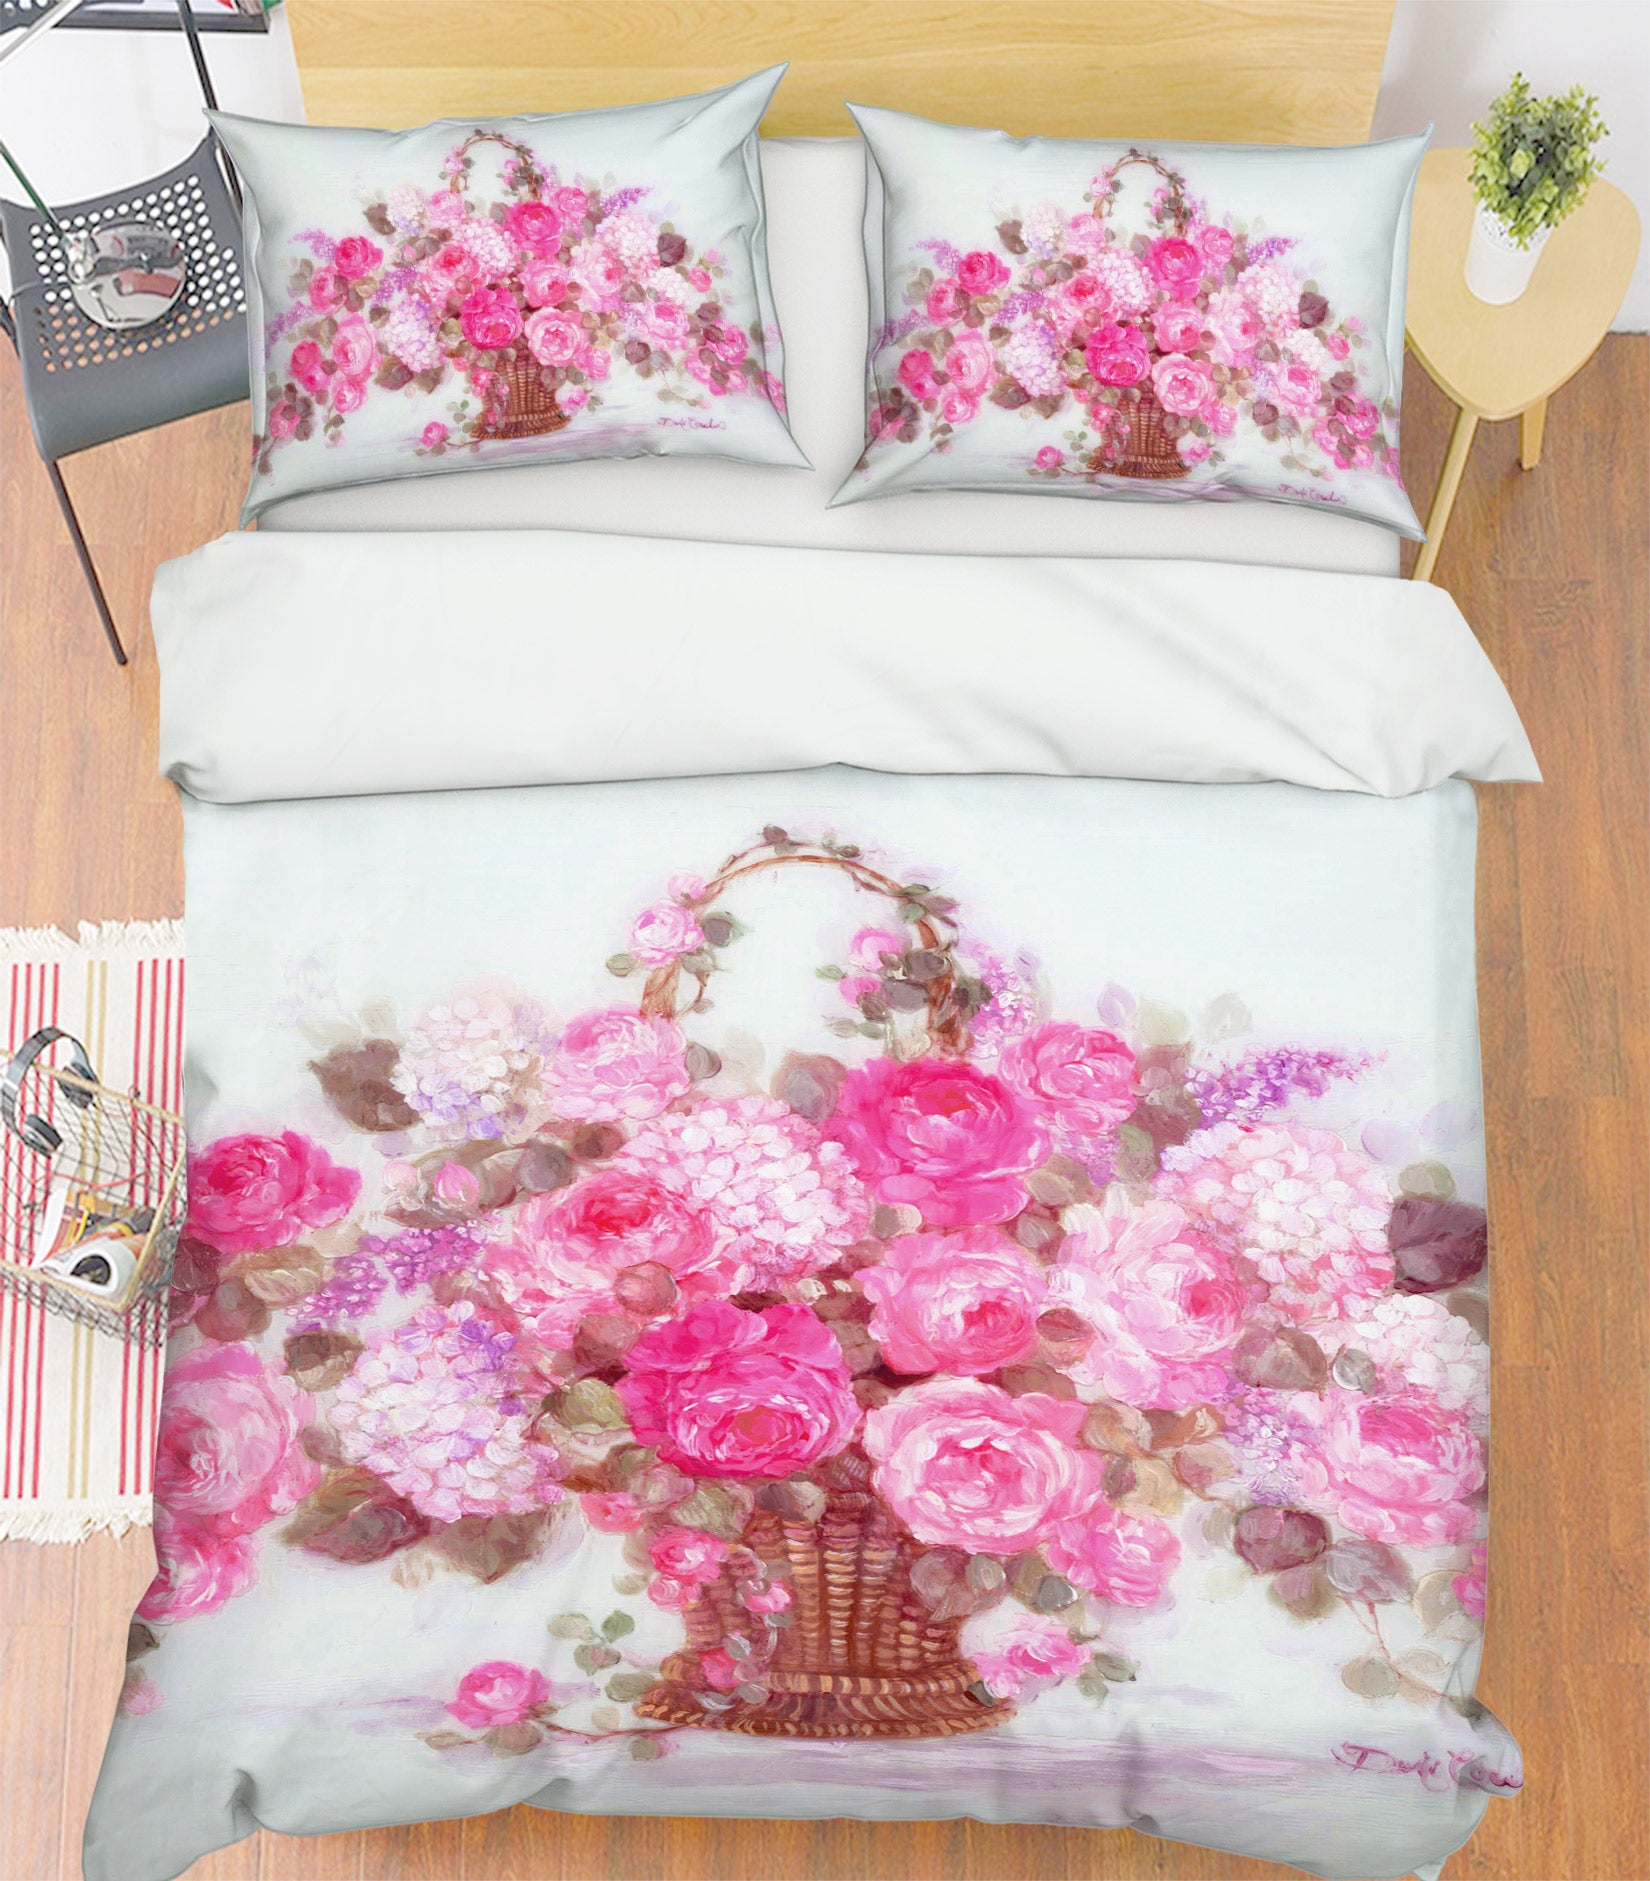 3D Pink Flower Basket 2112 Debi Coules Bedding Bed Pillowcases Quilt